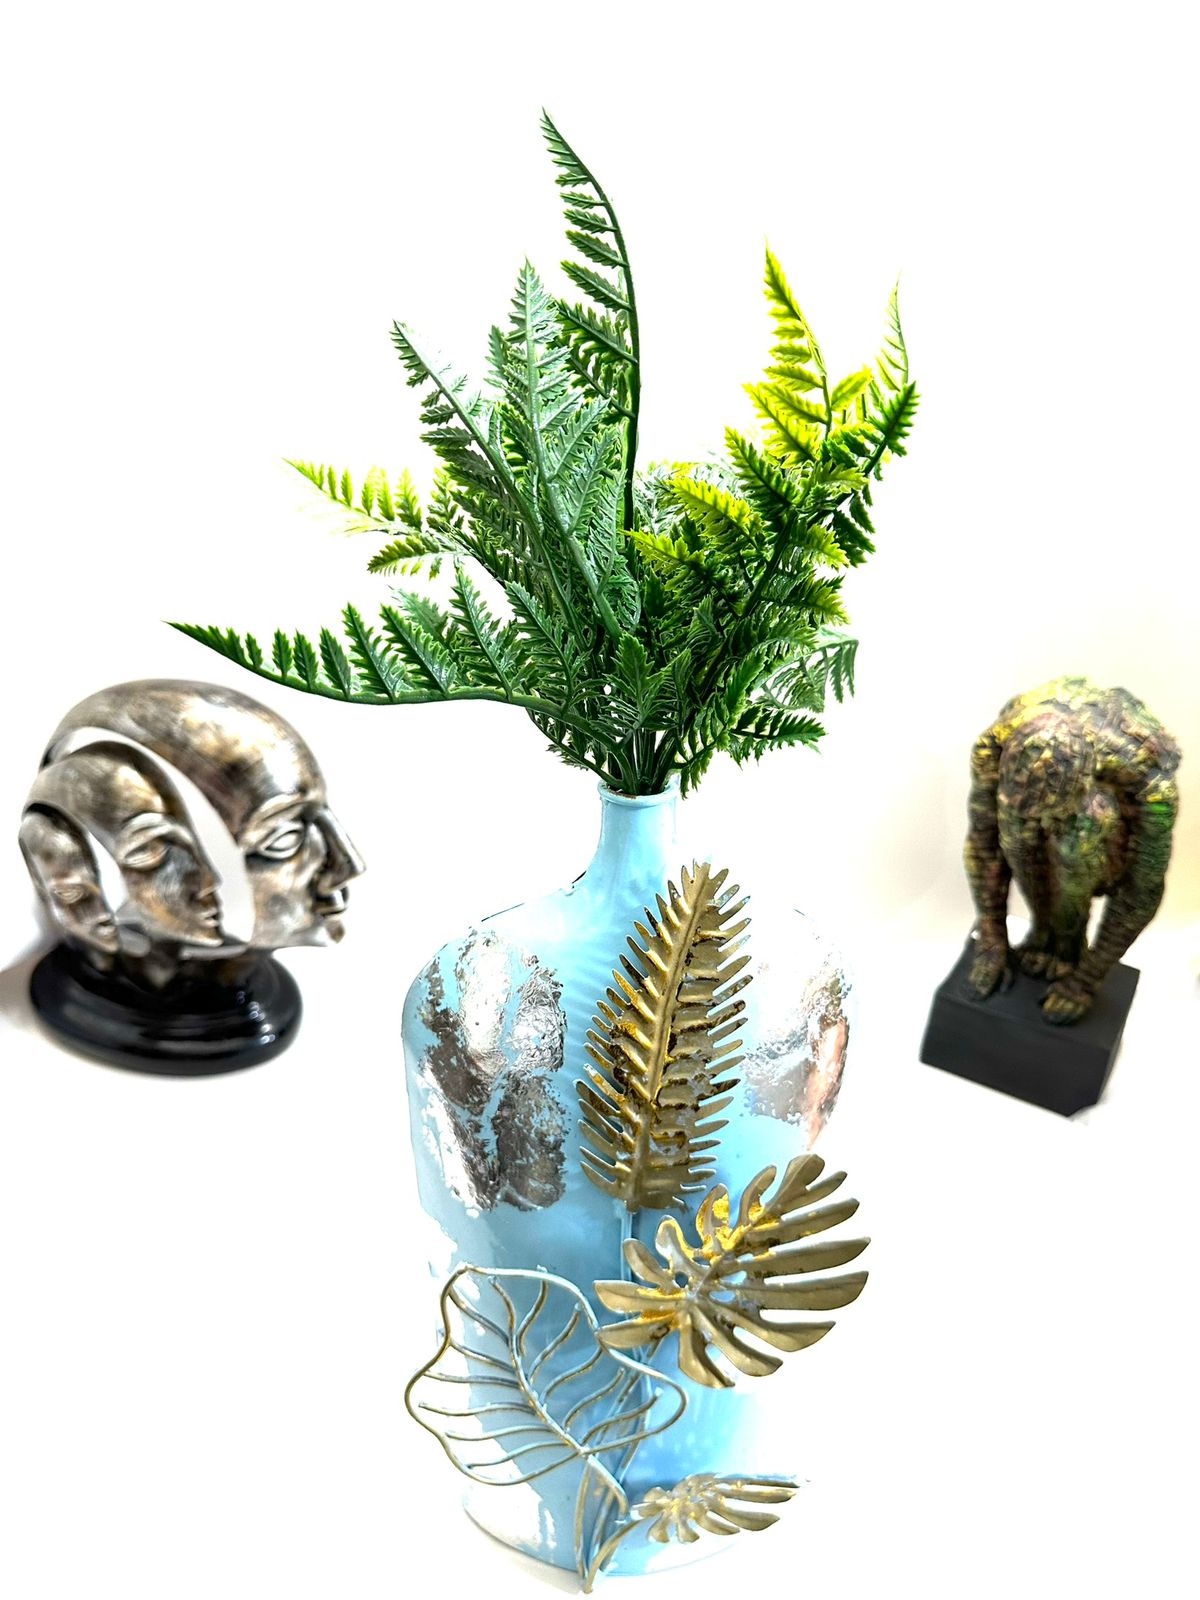 Designer Metal Planters Exciting Designs New In Store Limited Edition Tamrapatra